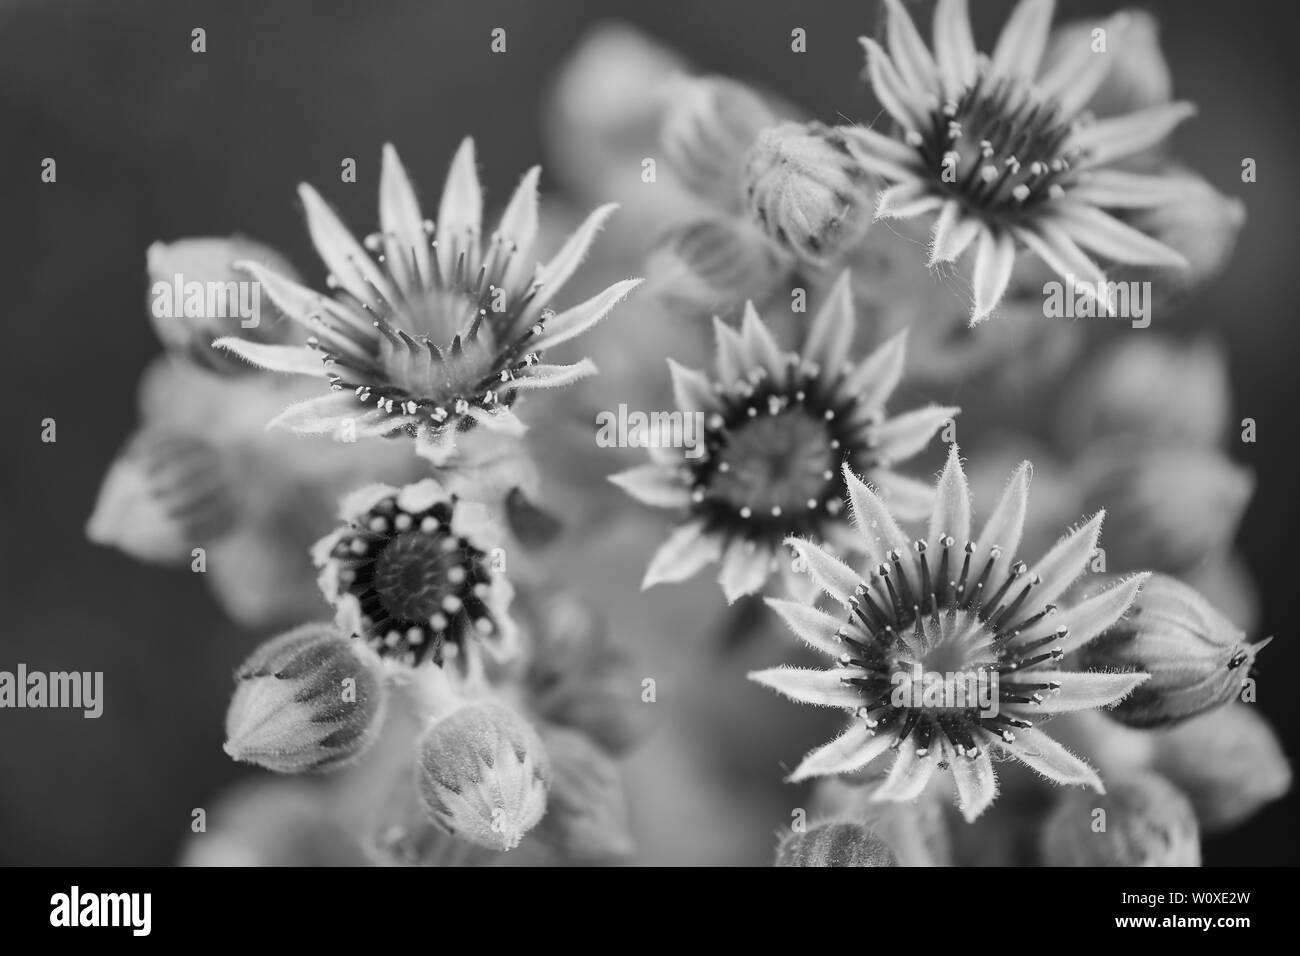 macro photo of blooming sempervivum succulent, focus on the right on the lowest blossom, black and white picture Stock Photo